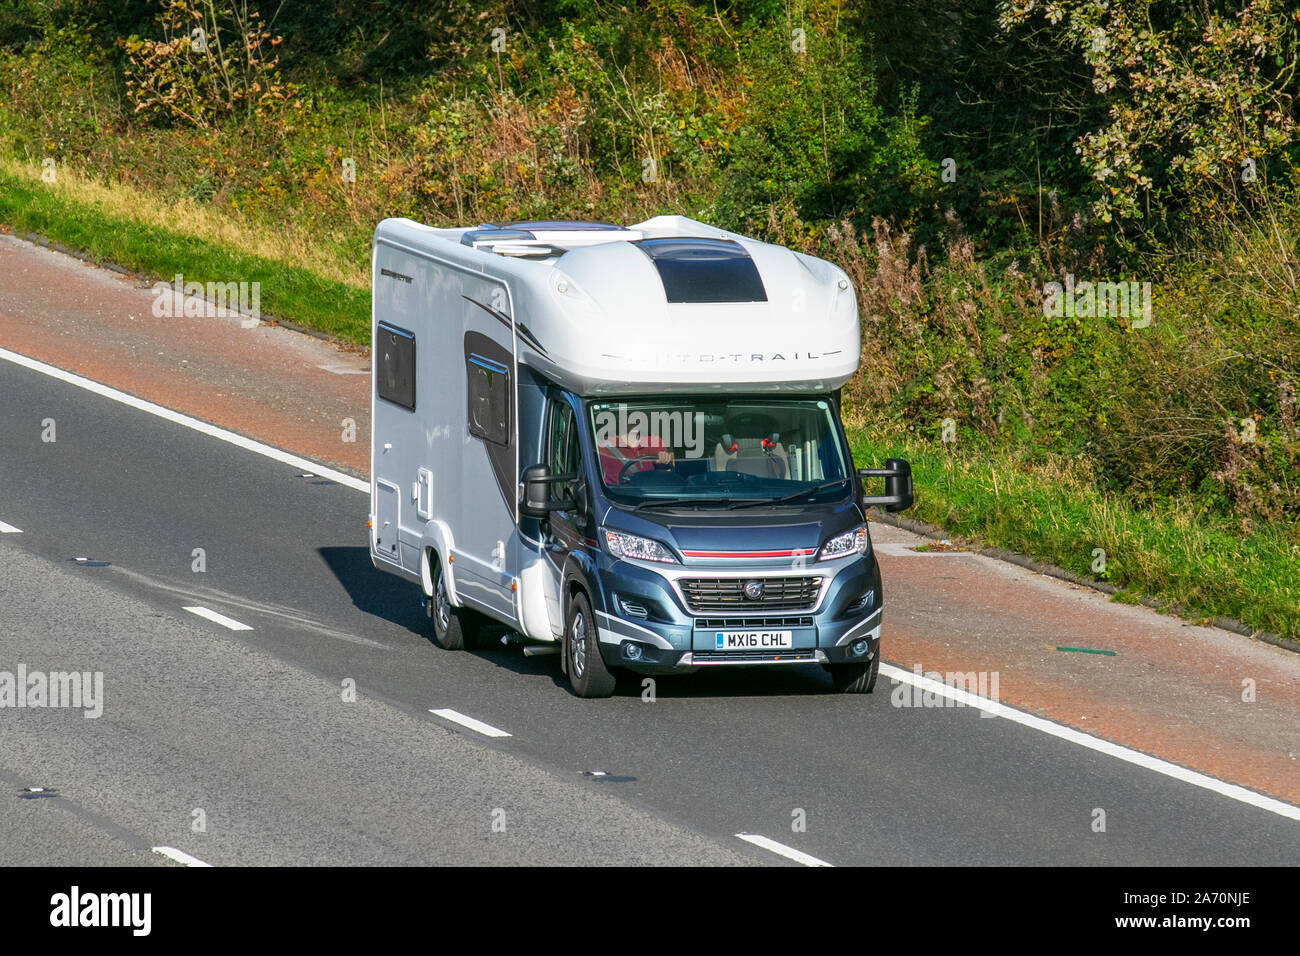 2016 Fiat Auto Trail Apache 700; UK Vehicular traffic, transport, modern vehicles, saloon cars, south-bound on the 3 lane M6 motorway highway. Stock Photo